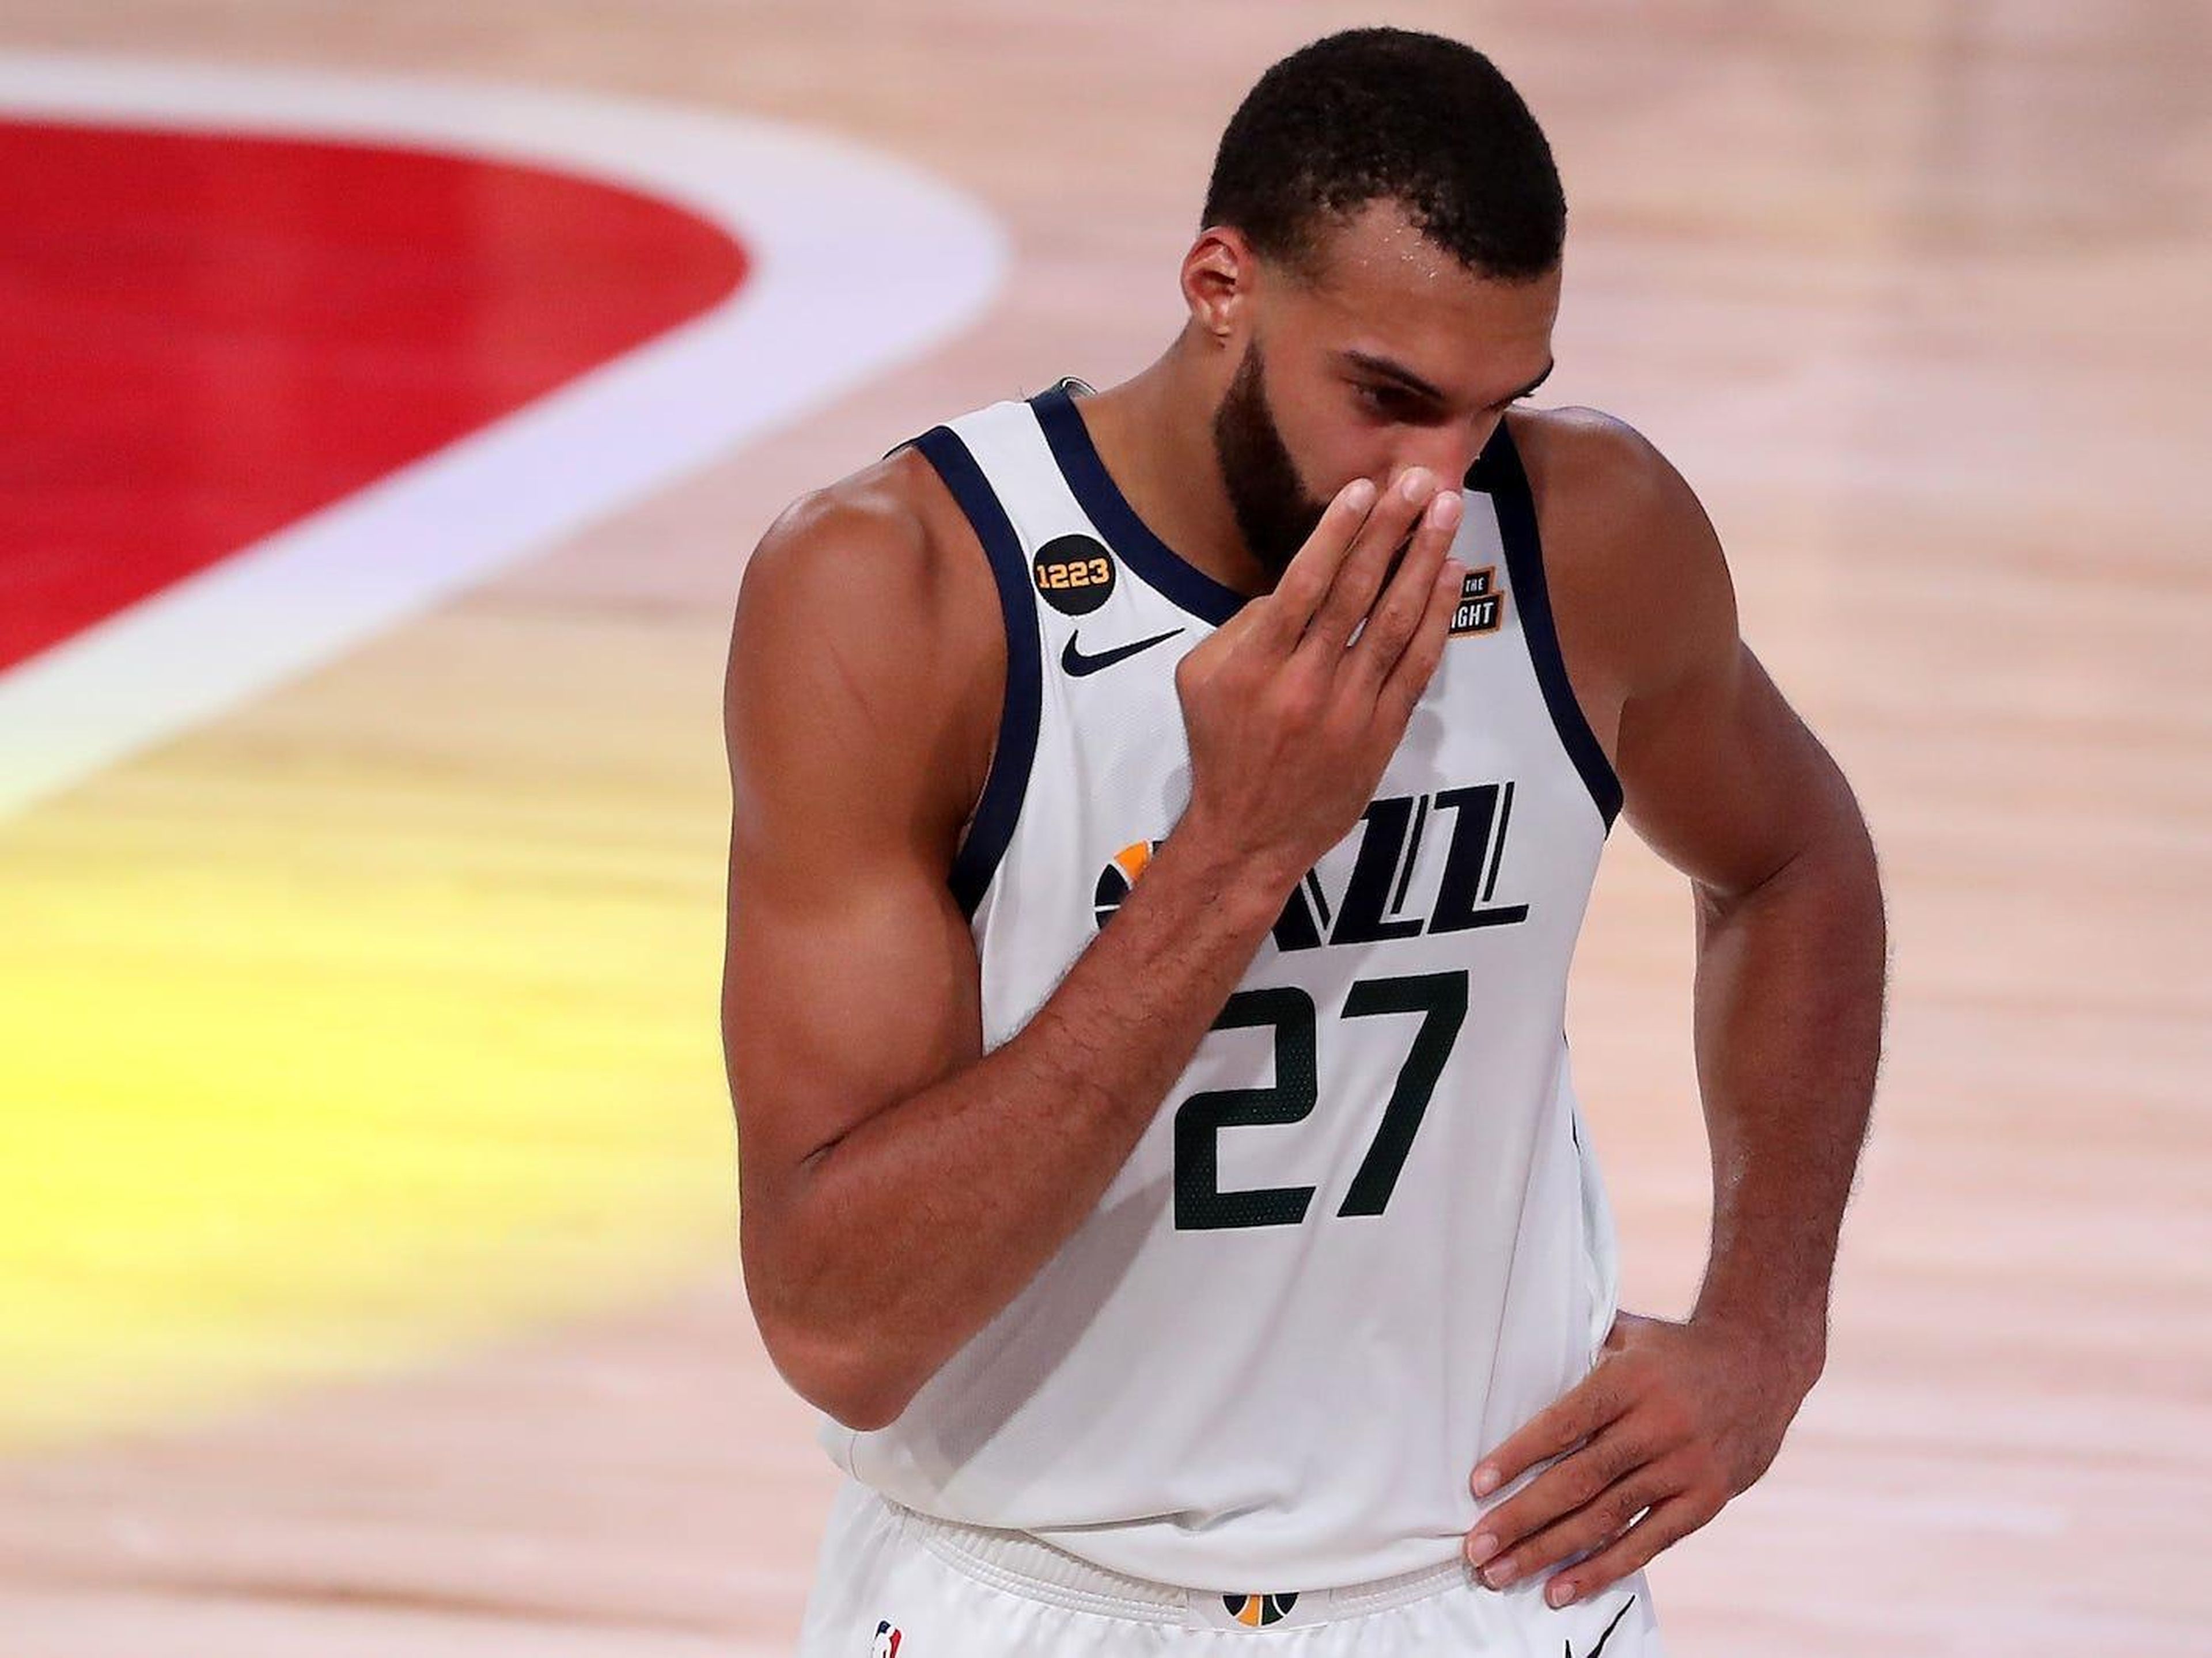 Rudy Gobert of the Utah Jazz reacts after their loss to the Denver Nuggets during the 2020 NBA Playoffs on September 1, 2020, in Lake Buena Vista, Florida. Mike Ehrmann/Getty Images